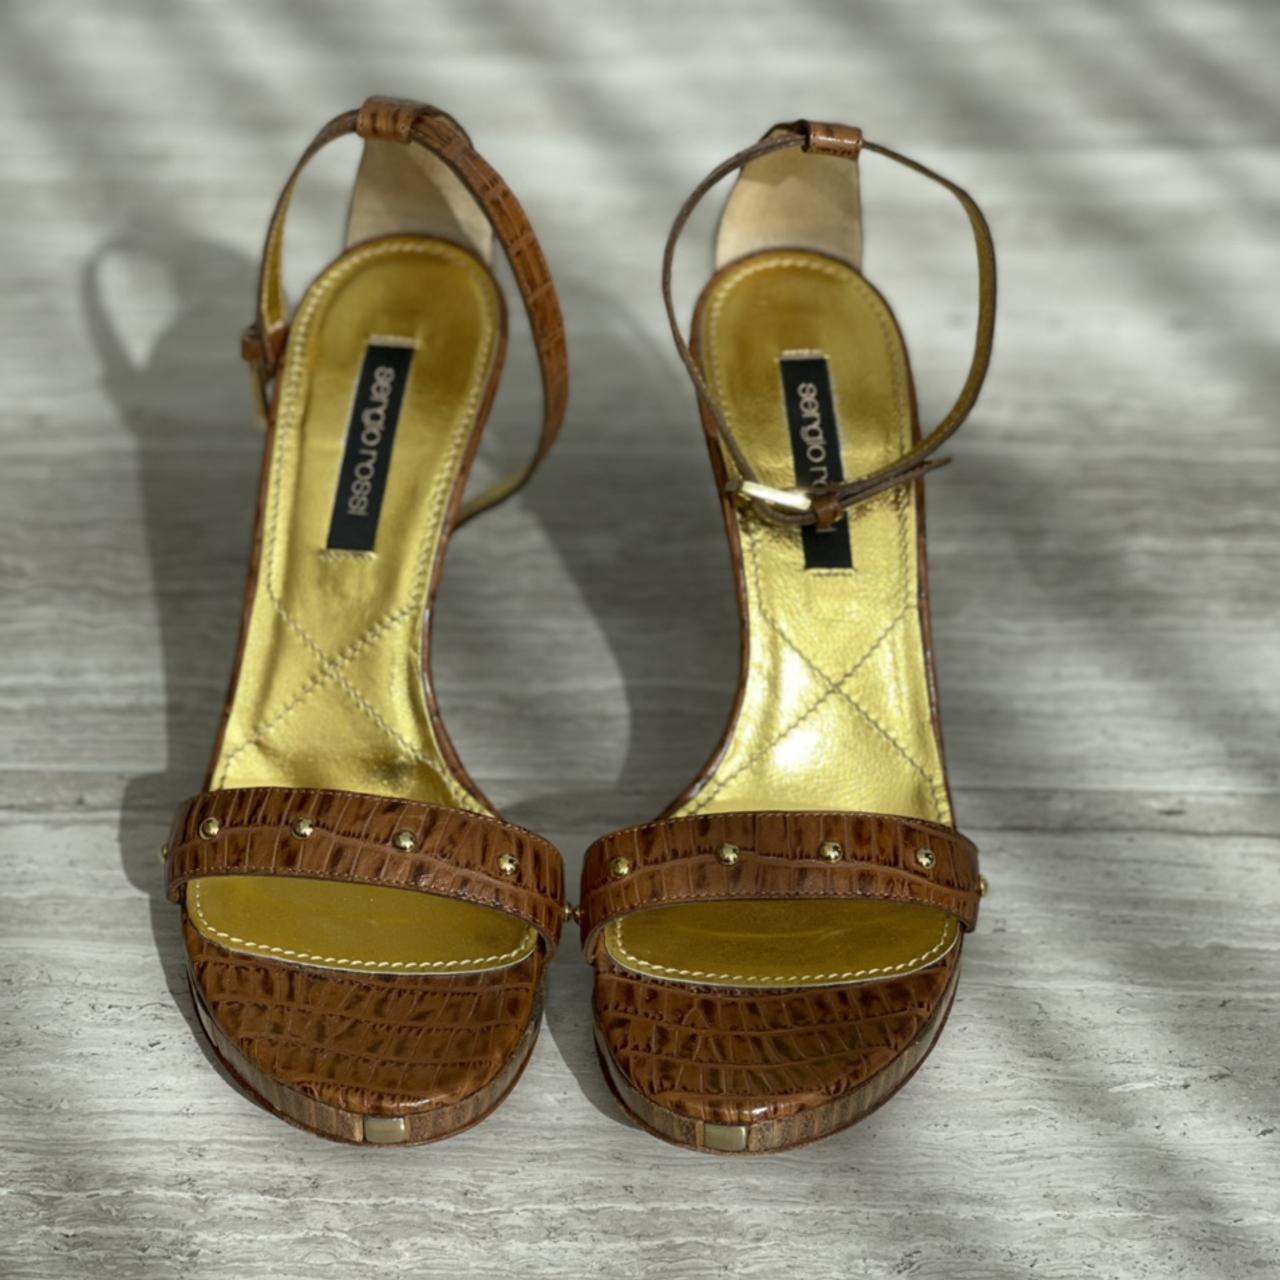 Sergio Rossi Women's Tan and Brown Sandals